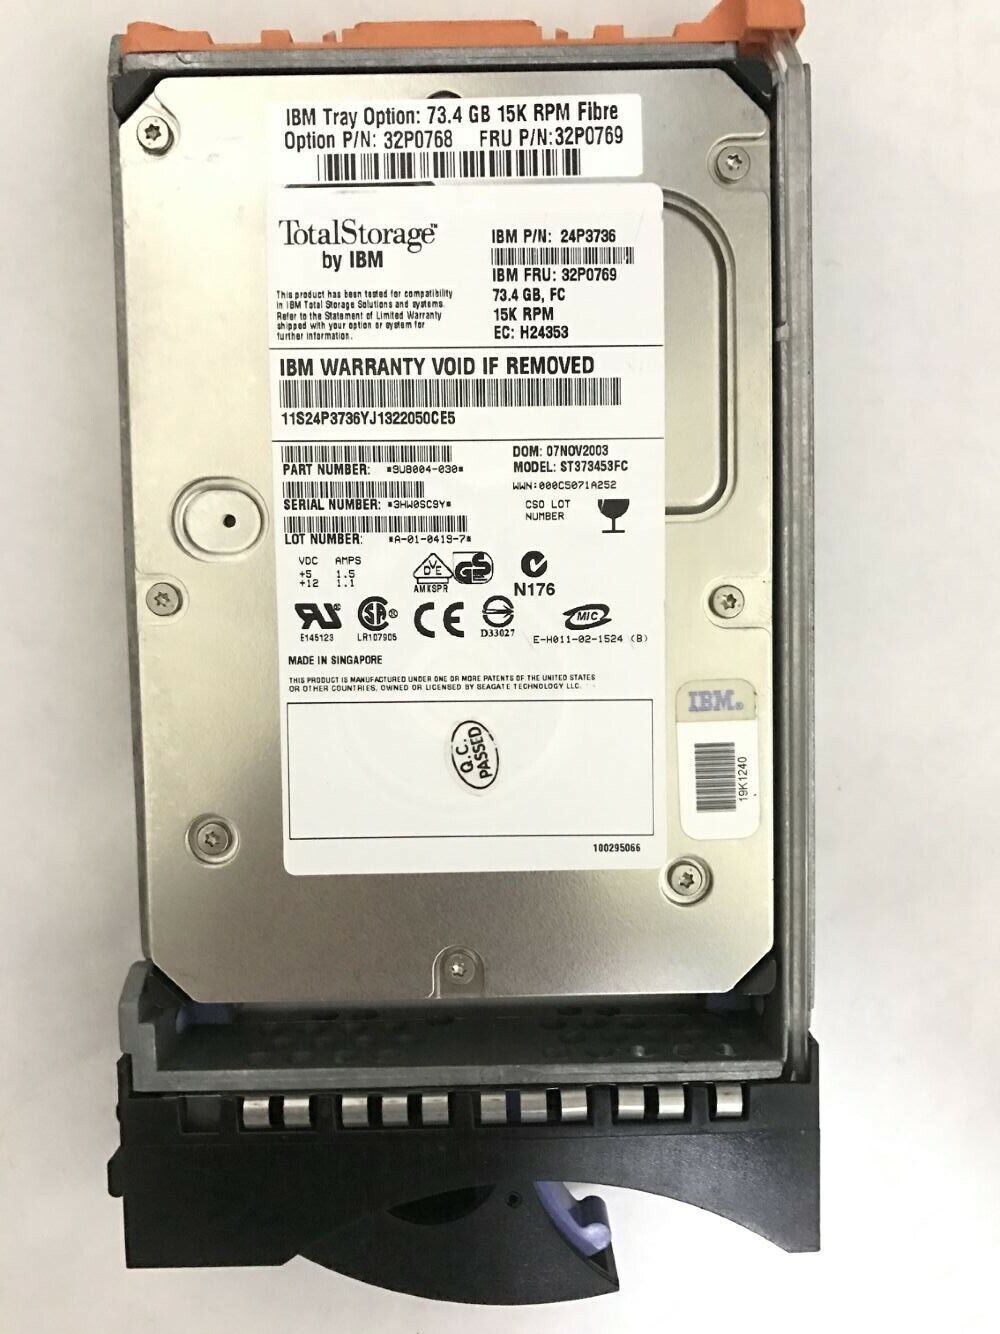 32P0768,32P0769,24P3736 IBM 73.4GB 15K rpm 2Gbps Fibre Channel hot-swappable